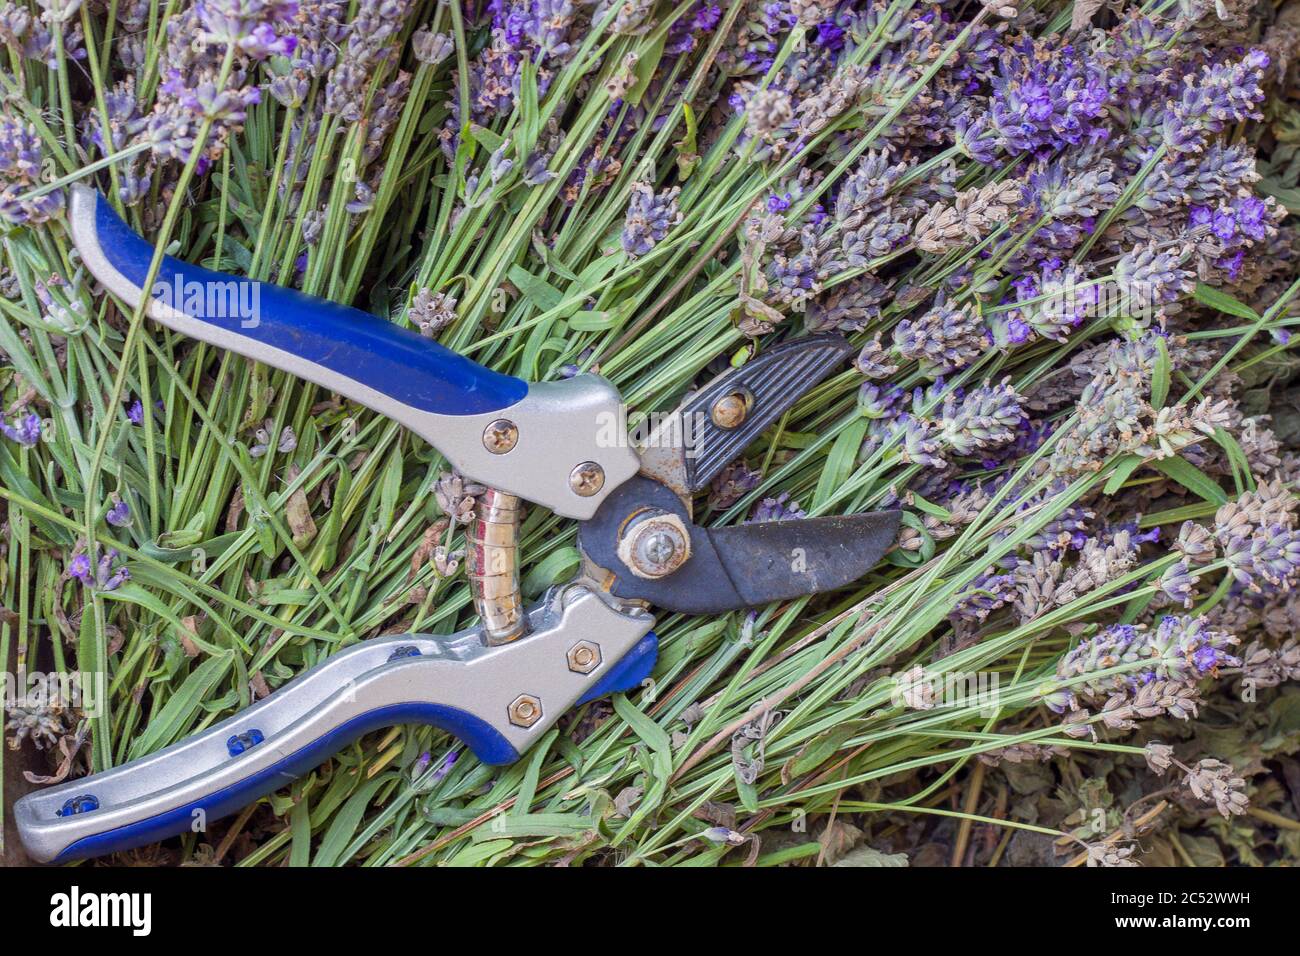 A bunch of ripe lavender harvested, against the background of growing bushes of lavender, secateurs tool for cutting lavender. Stock Photo